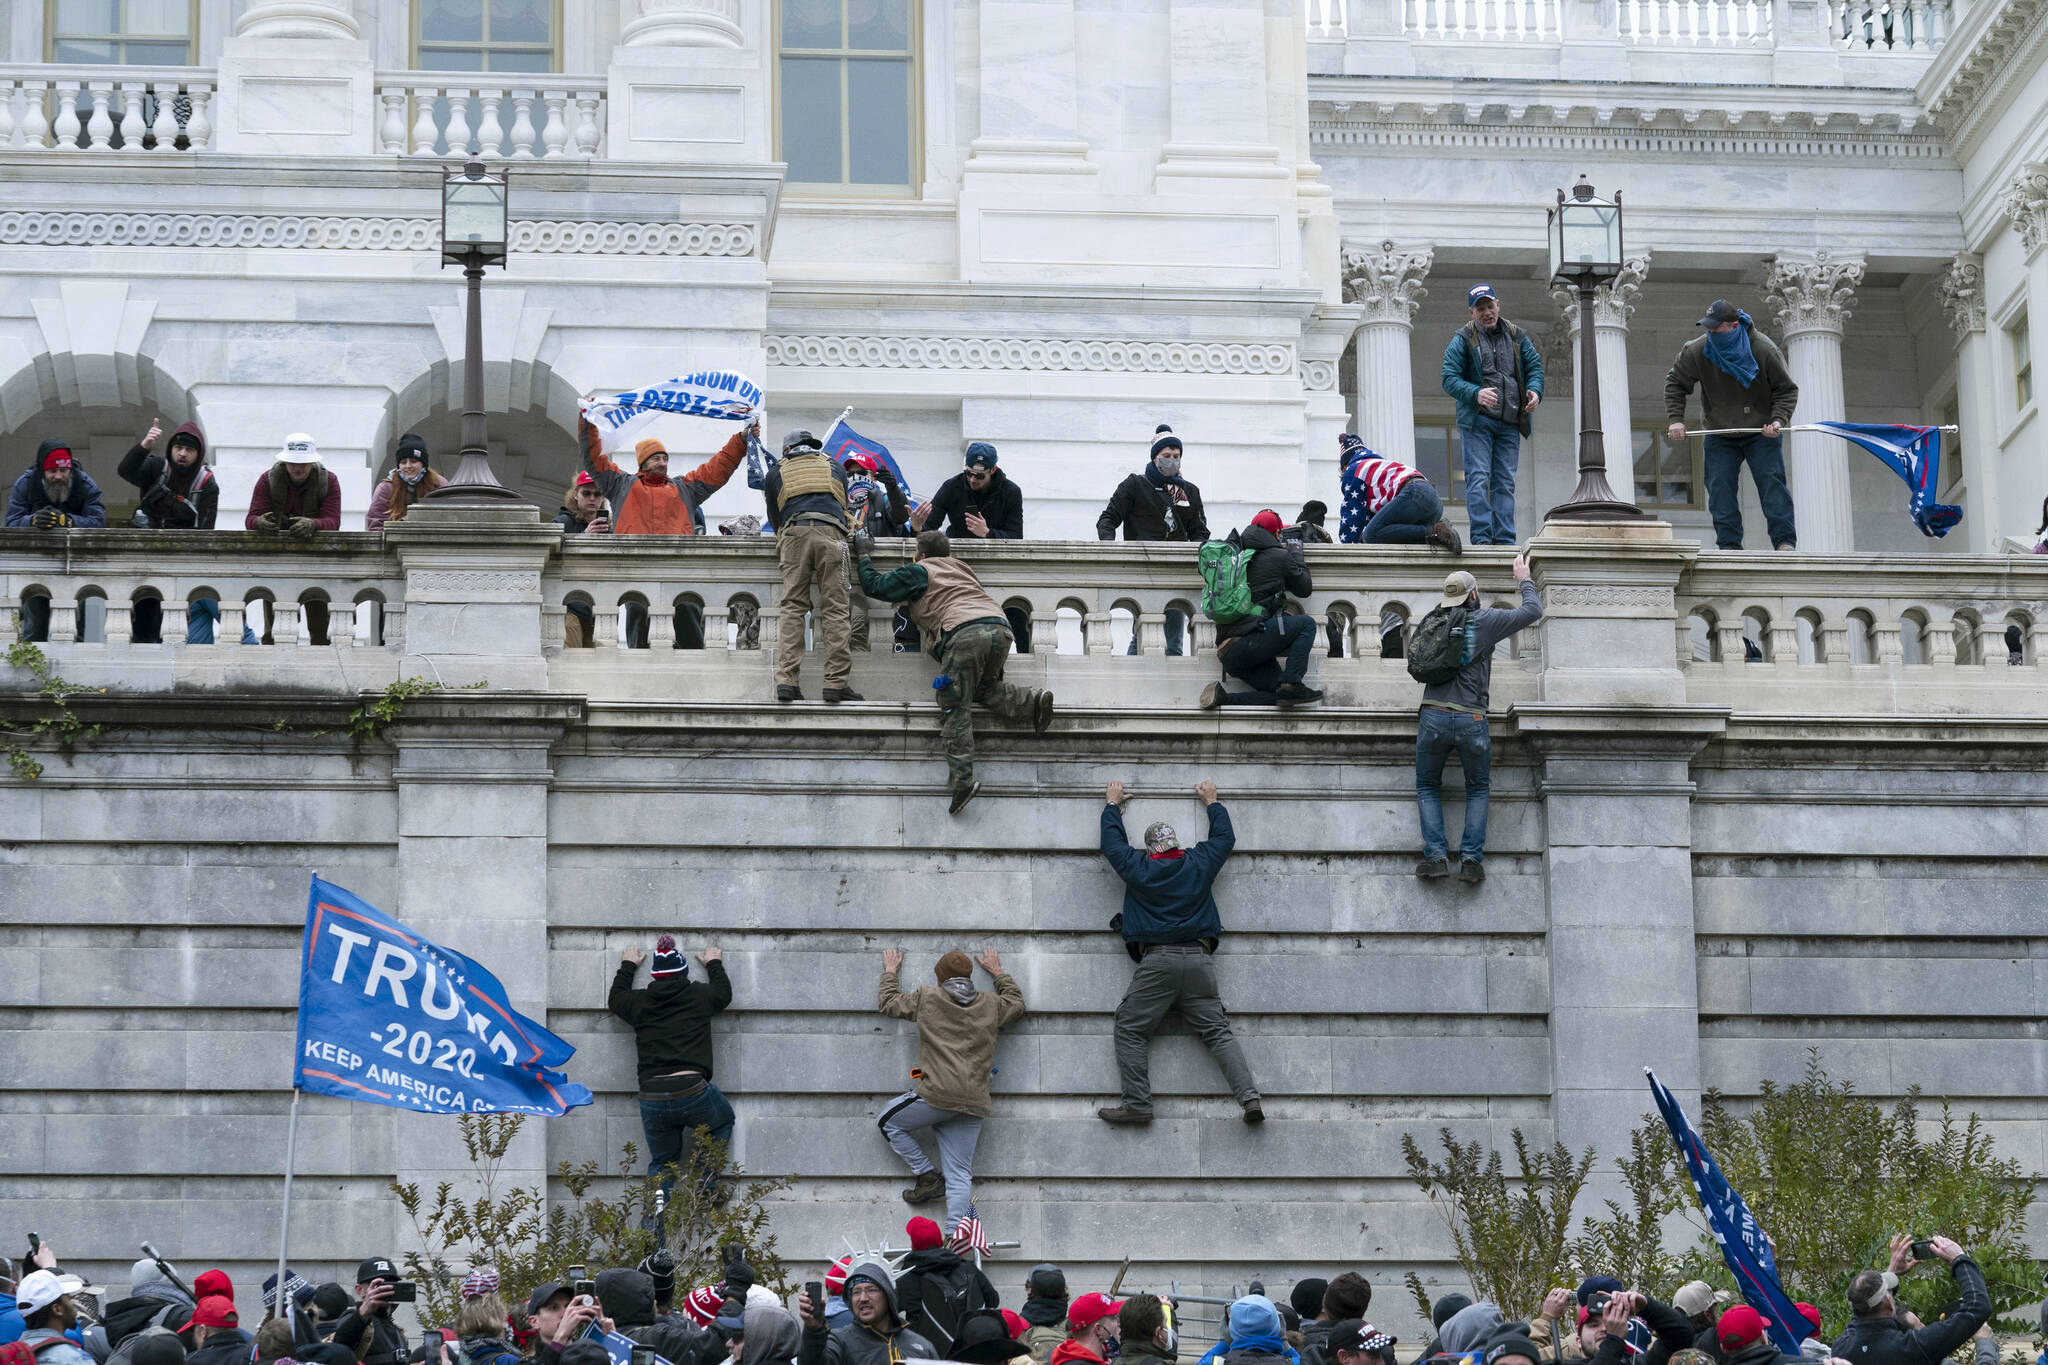 In this Jan. 6, 2021 file photo, supporters of then President Donald Trump climb the west wall of the the U.S. Capitol in Washington. A New York mother and son have been charged with theft in aiding the disappearance of House Speaker Nancy Pelosi’s laptop during the Jan. 6 insurrection after the FBI initially raided a home 4,500 miles away in Alaska, looking for the computer. According to court documents, the FBI on Friday, Oct. 1 arrested Maryann Mooney-Rondon, and her son, Rafael Rondon, of Watertown, N.Y. Both also face other charges related to the riot at the Capitol. (AP Photo/Jose Luis Magana, File)